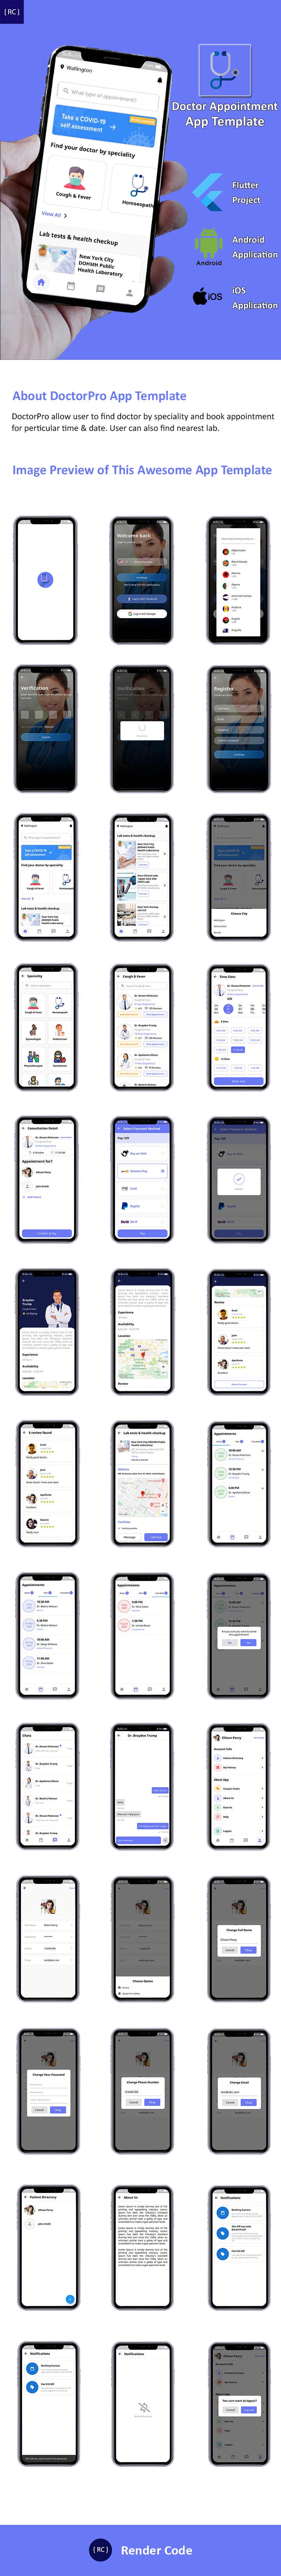 Doctor Appointment Booking App + Online Pharmacy App + Delivery Boy App Template in Flutter | 3 Apps - 5